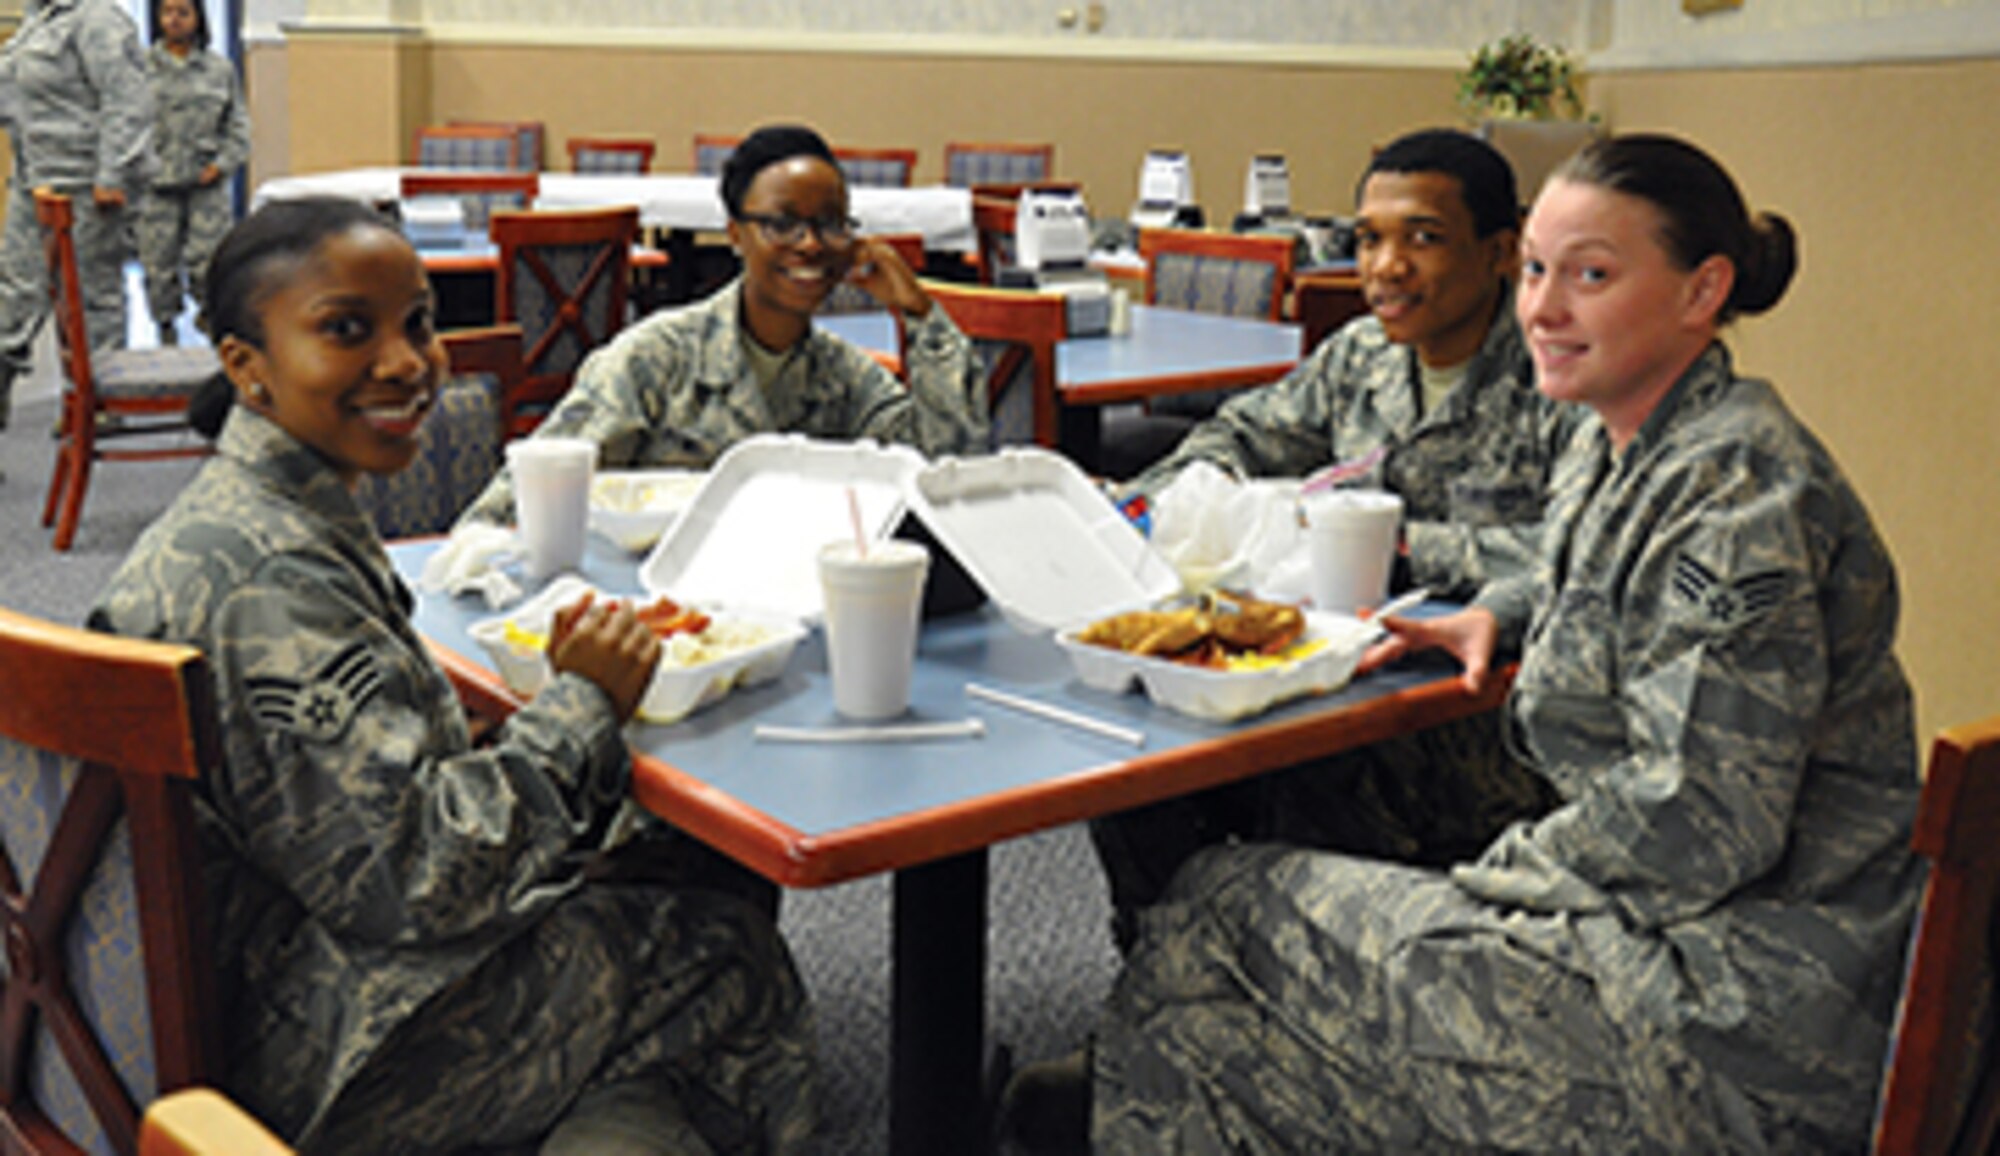 Members of the 908th attend the recent mentoring breakfast. (Photo by Tech. Sgt. Jay Ponder)